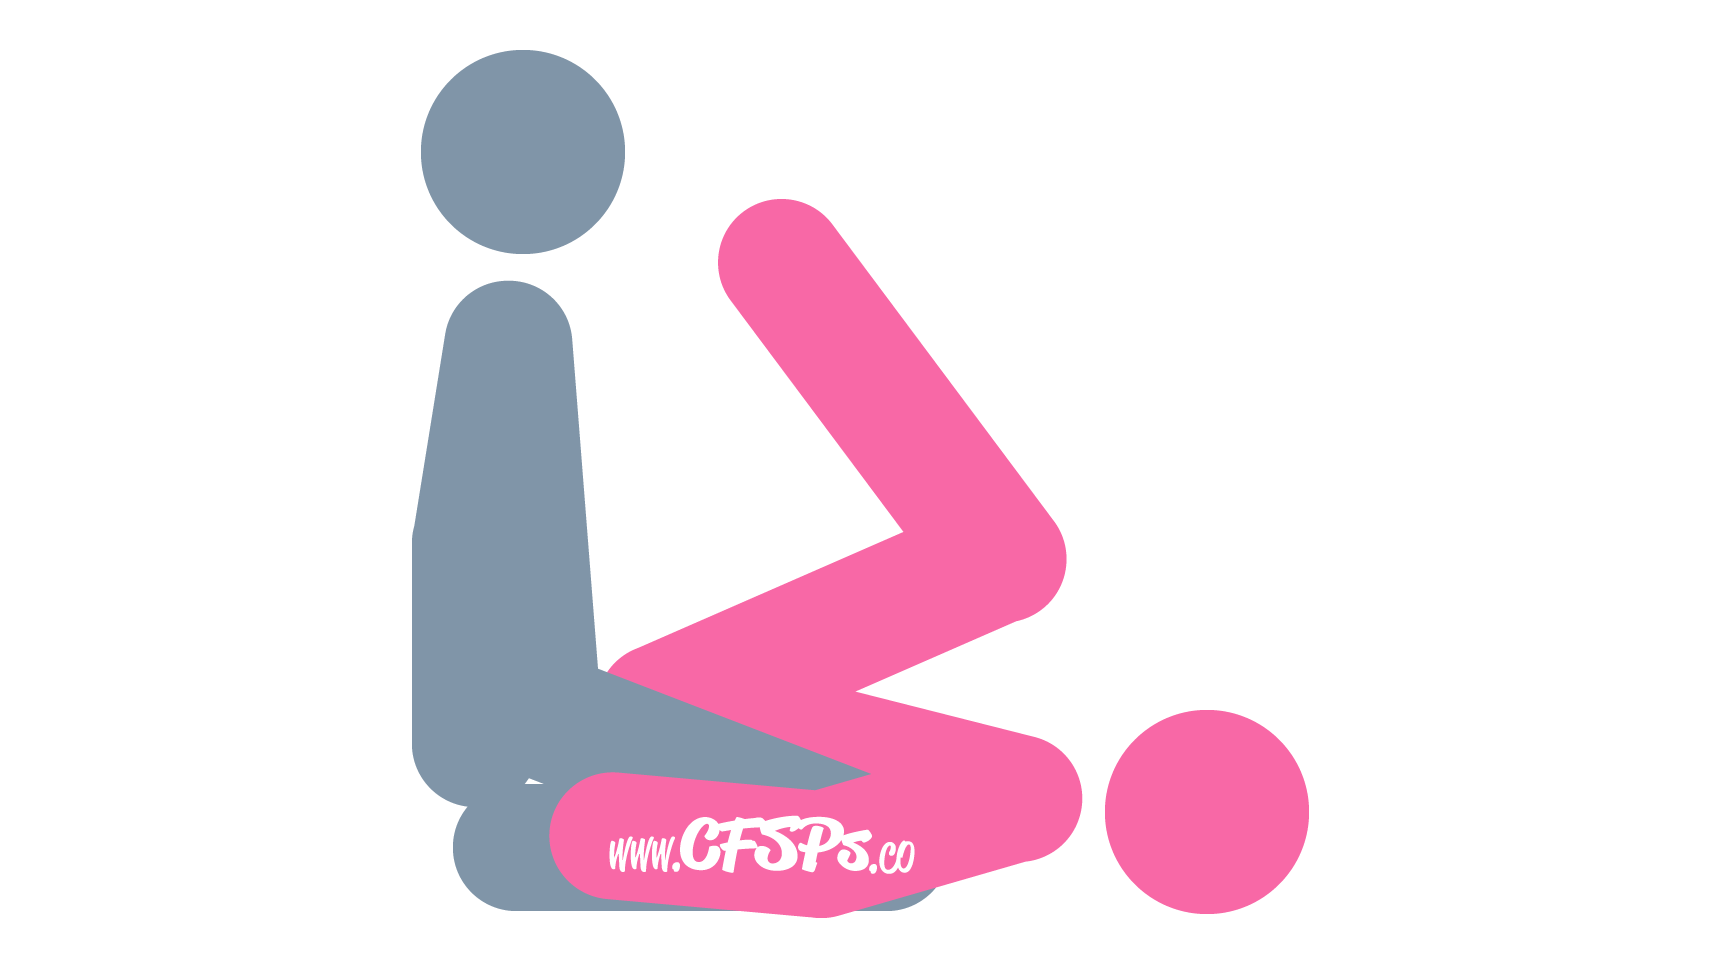 This stick figure image depicts a man and woman having sex in the Candle sex position. The woman is lying on her back with her legs open a little and her knees bent and near her chest. The man is kneeling before her with his legs open and her knees near her sides while he sits back on his feet.